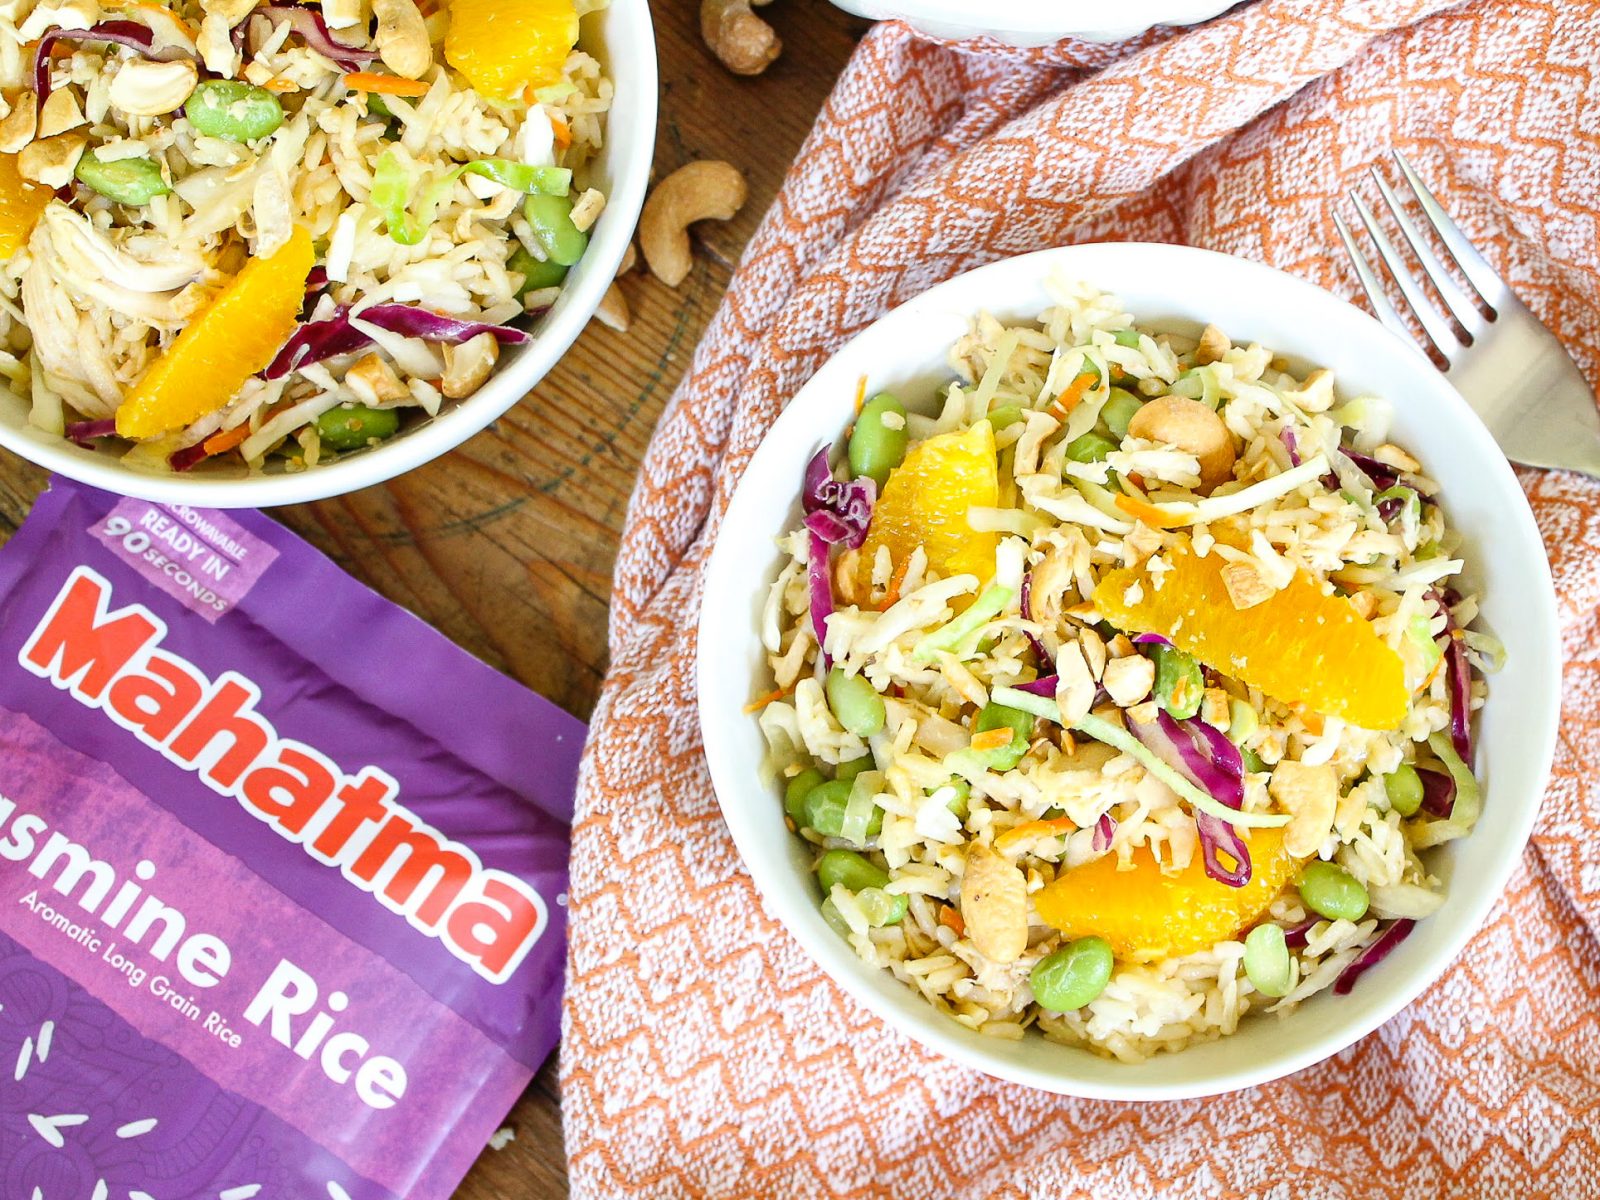 Mahatma® Ready To Serve Rice Makes Mealtime Quick & Easy – Try This Jasmine Rice Salad With Asian Chicken For A Meal In A Flash!